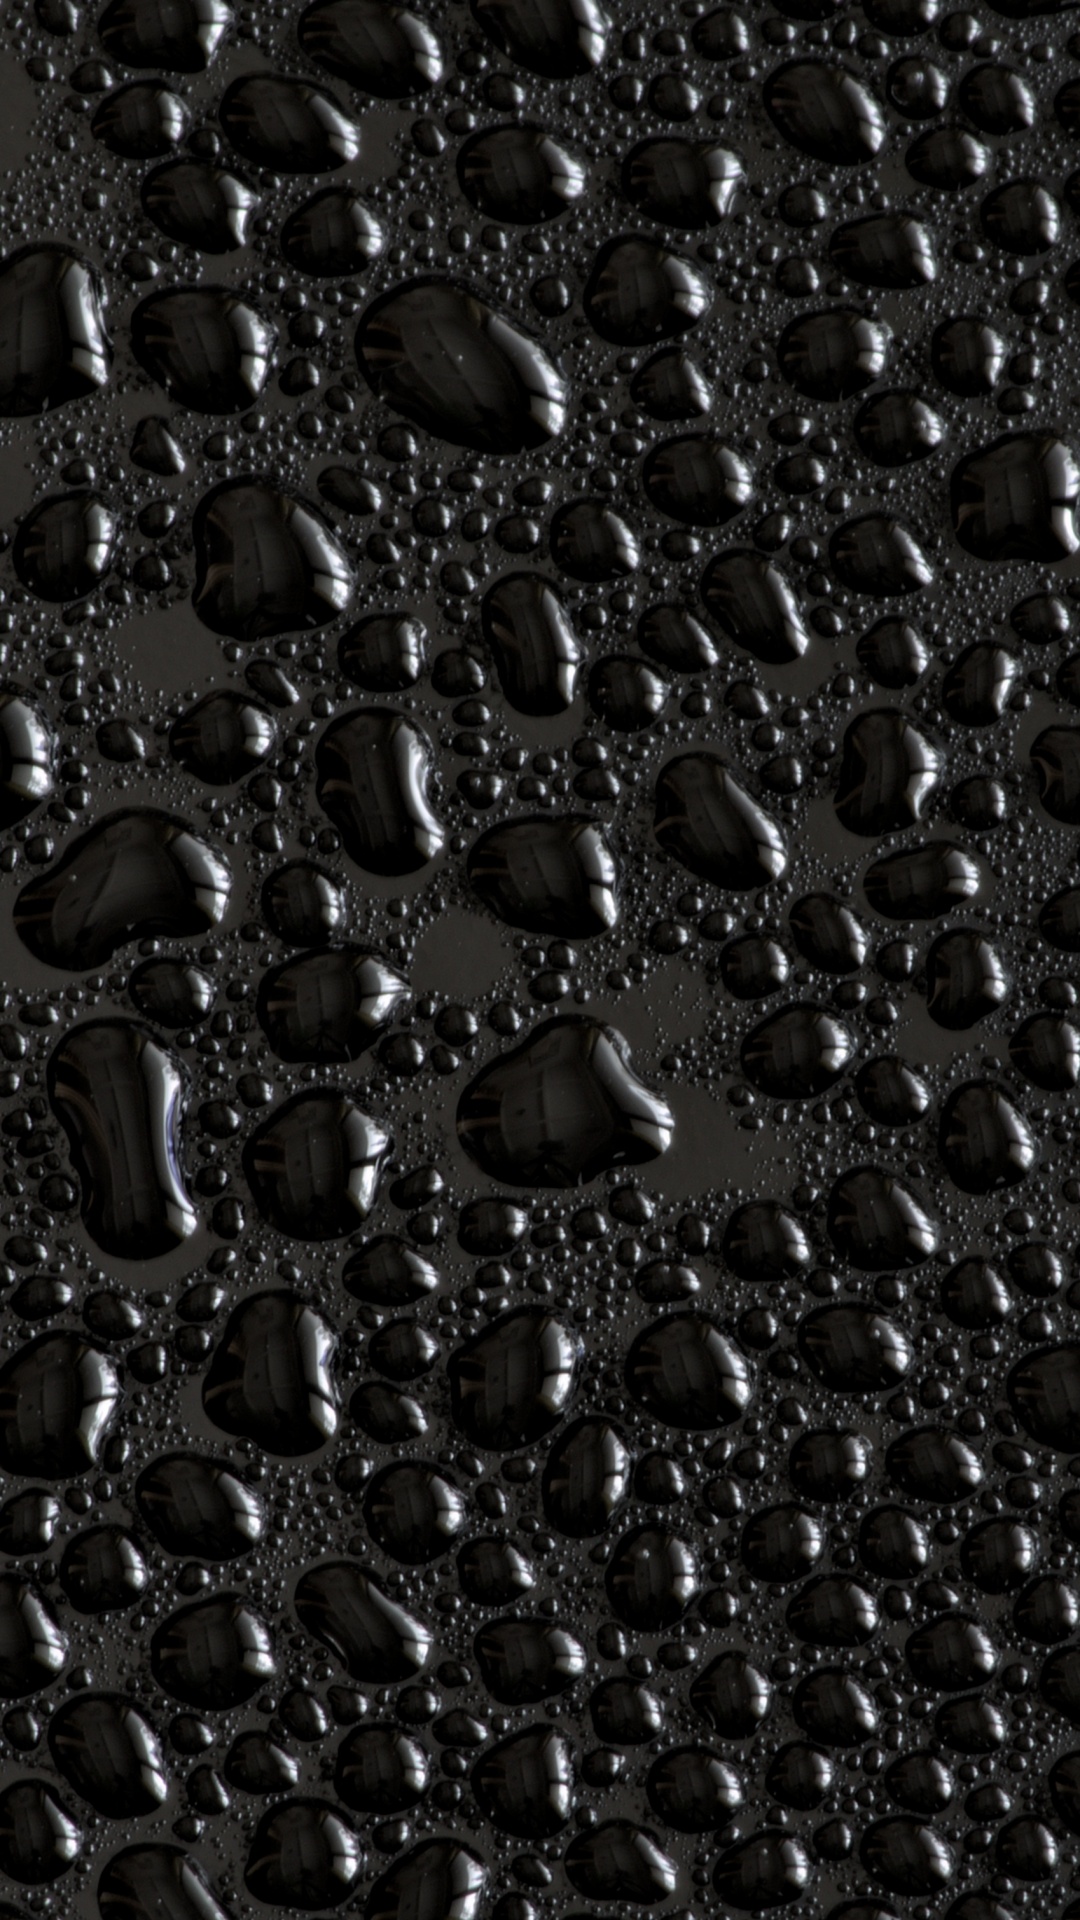 Water droplets Wallpaper 4K, Black background, Photography, #5488